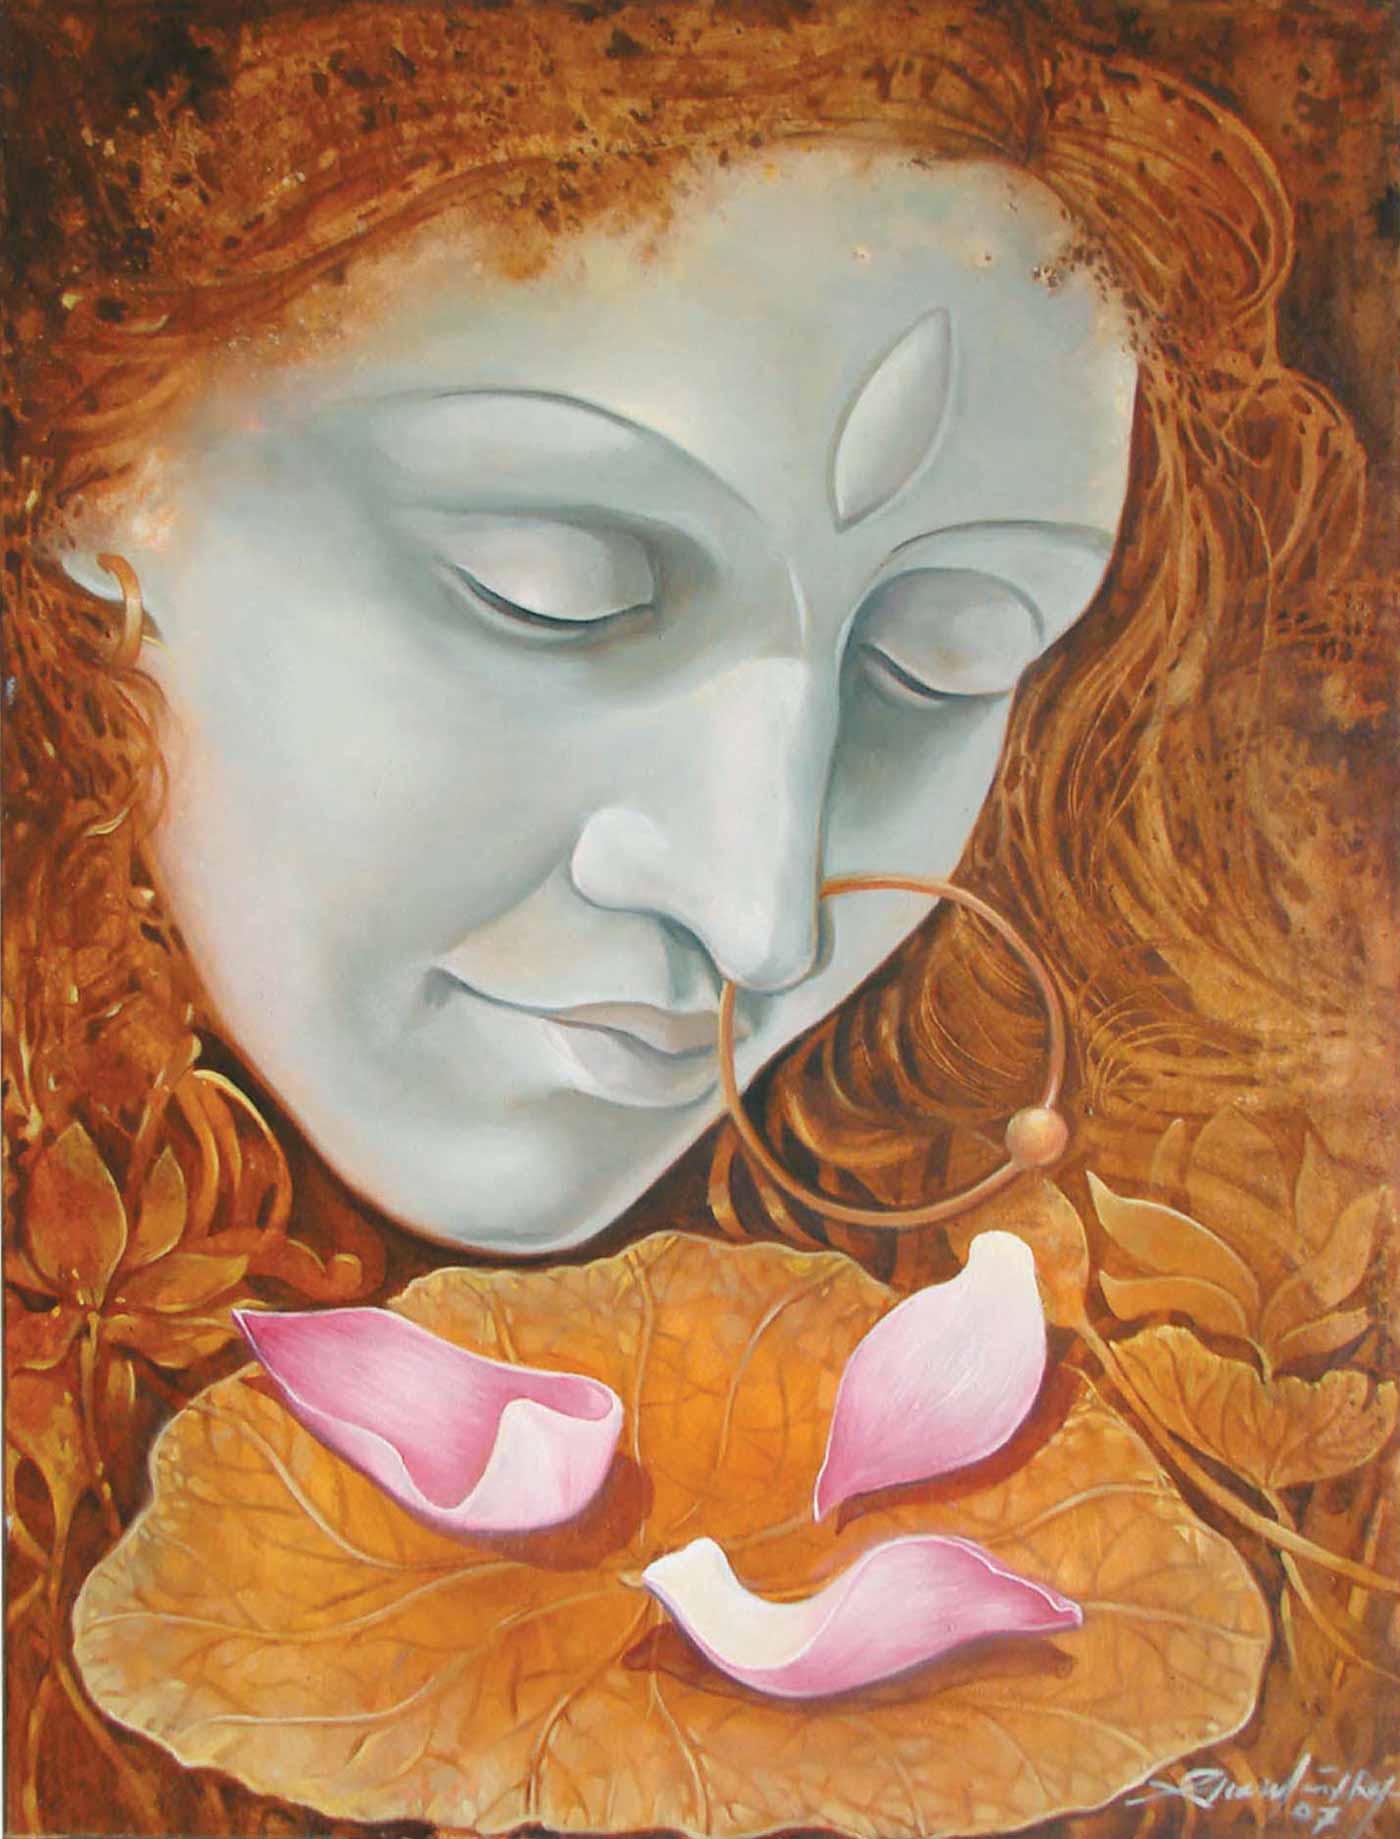 Figurative Painting with Oil on Canvas "Morning Prayer" art by Gautam Partho Roy